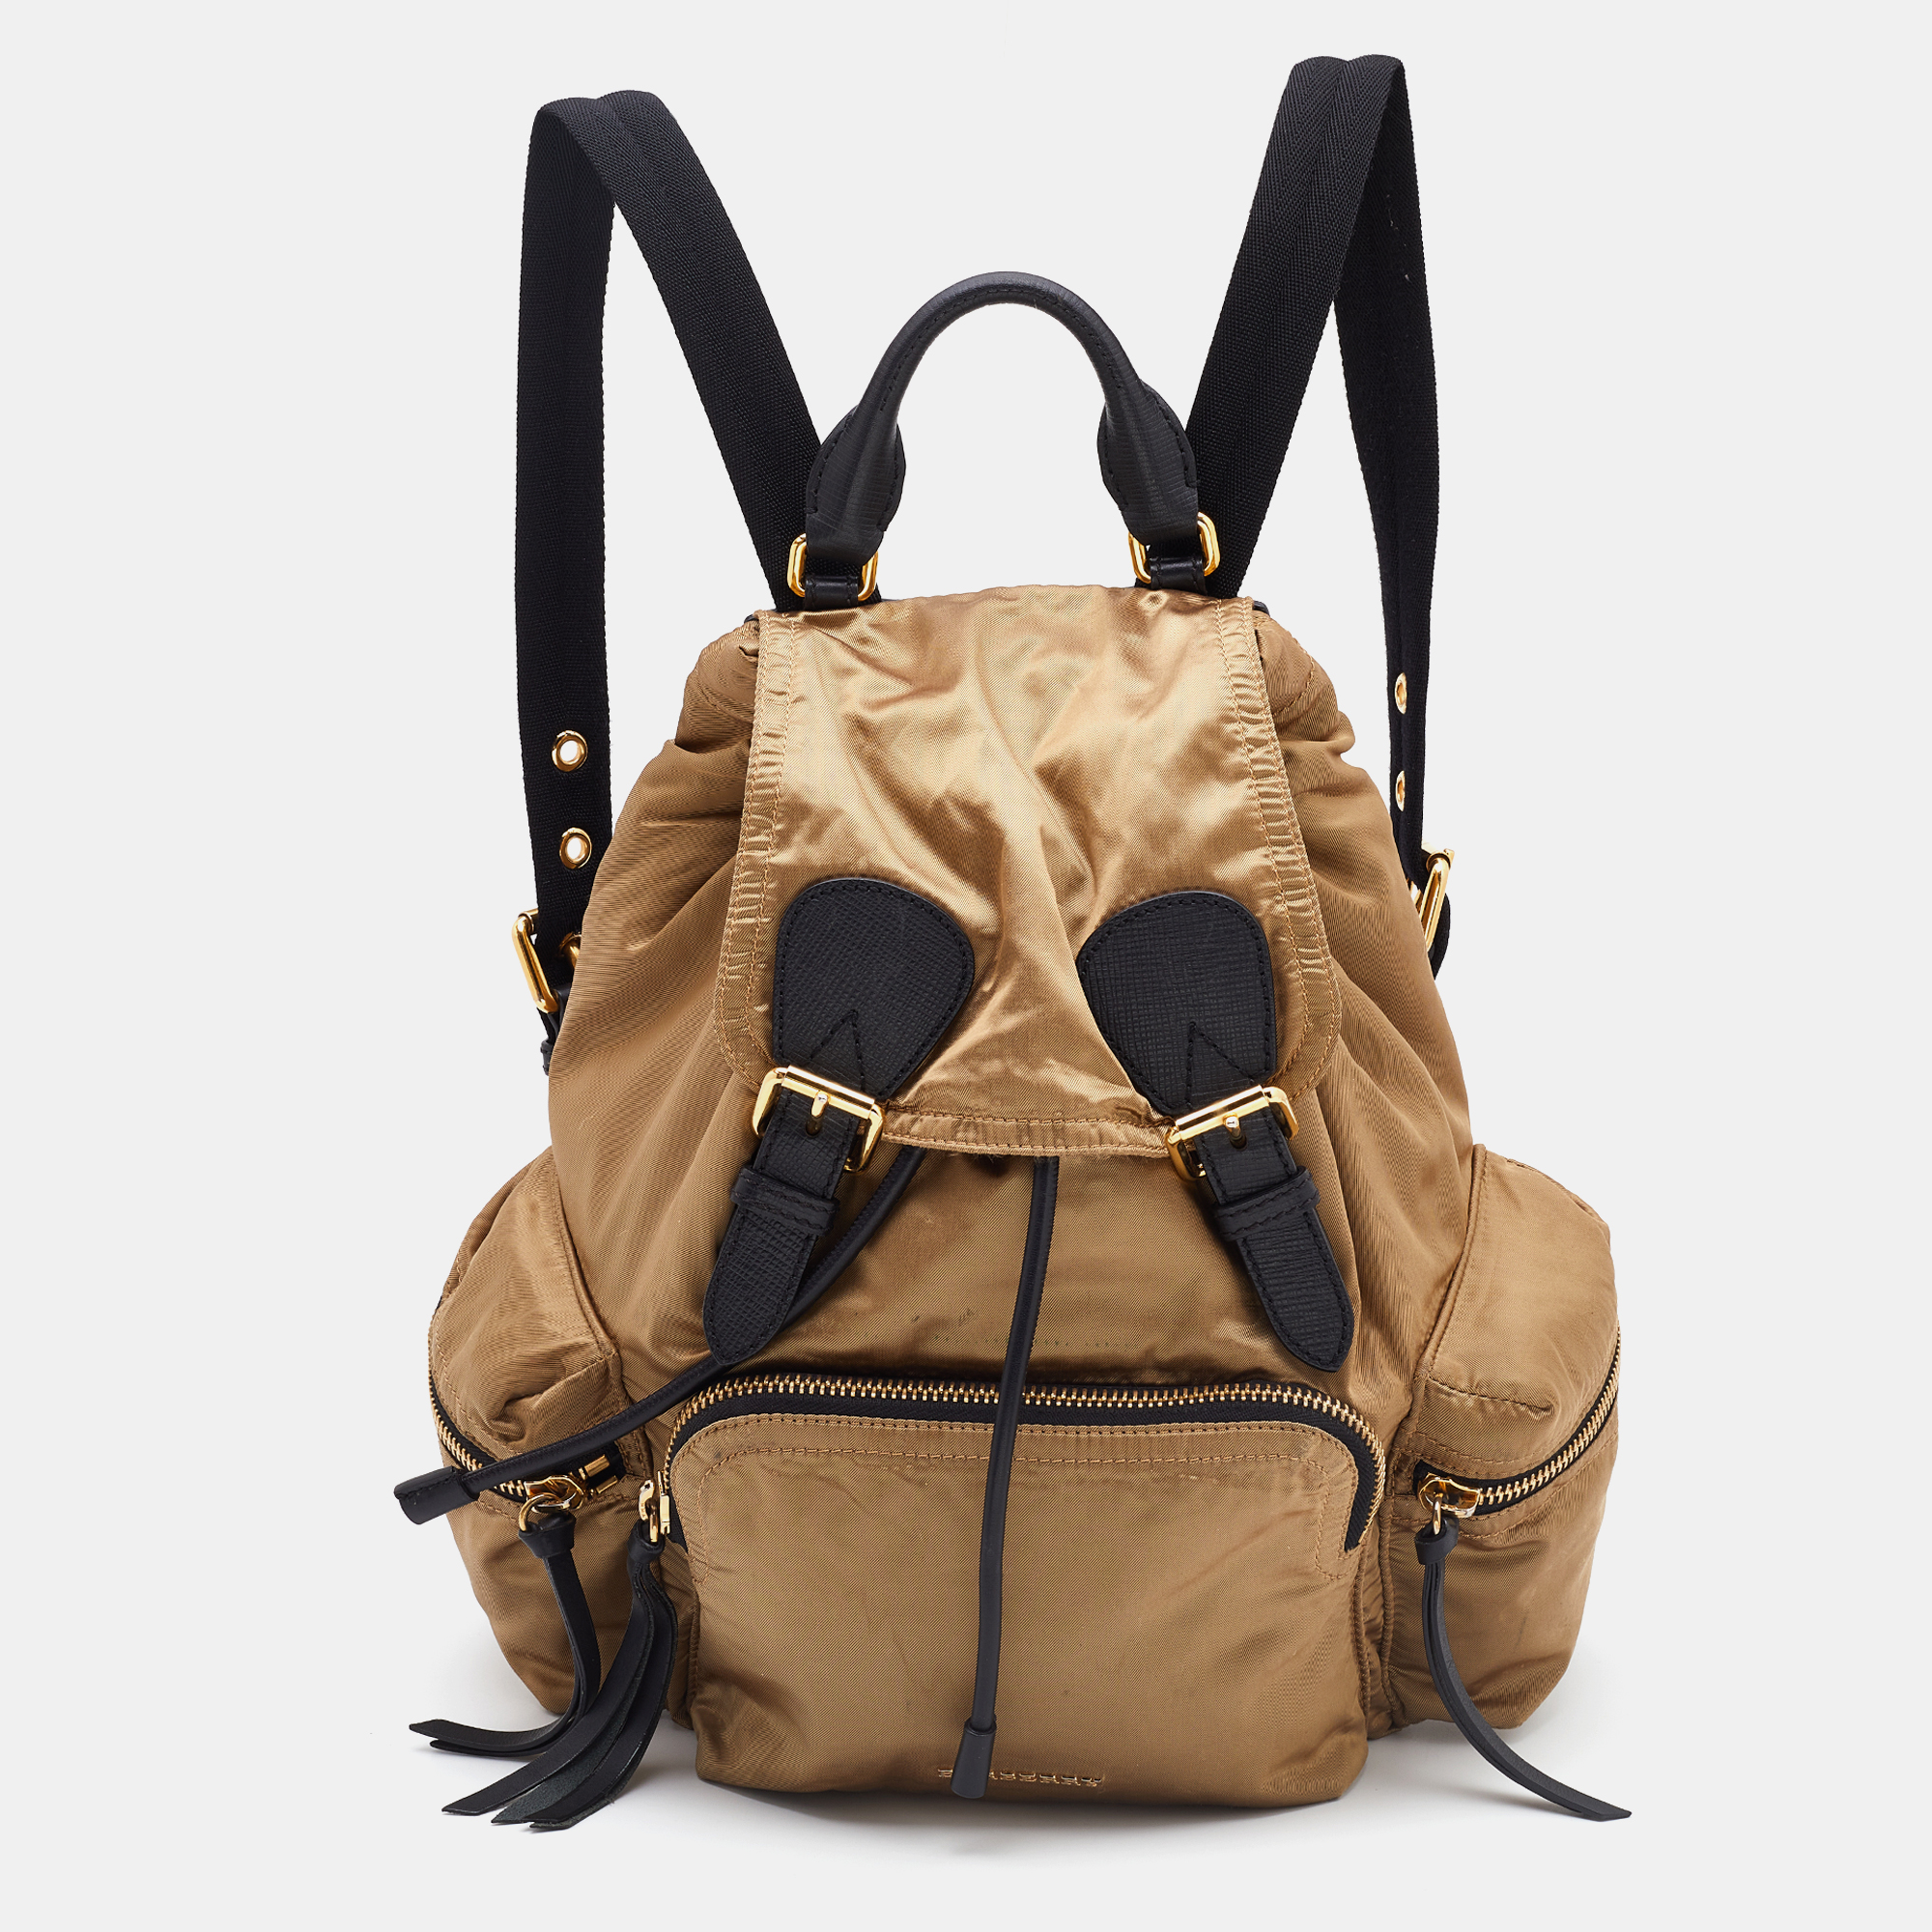 Burberry Gold/Black Nylon And Leather Rucksack Backpack